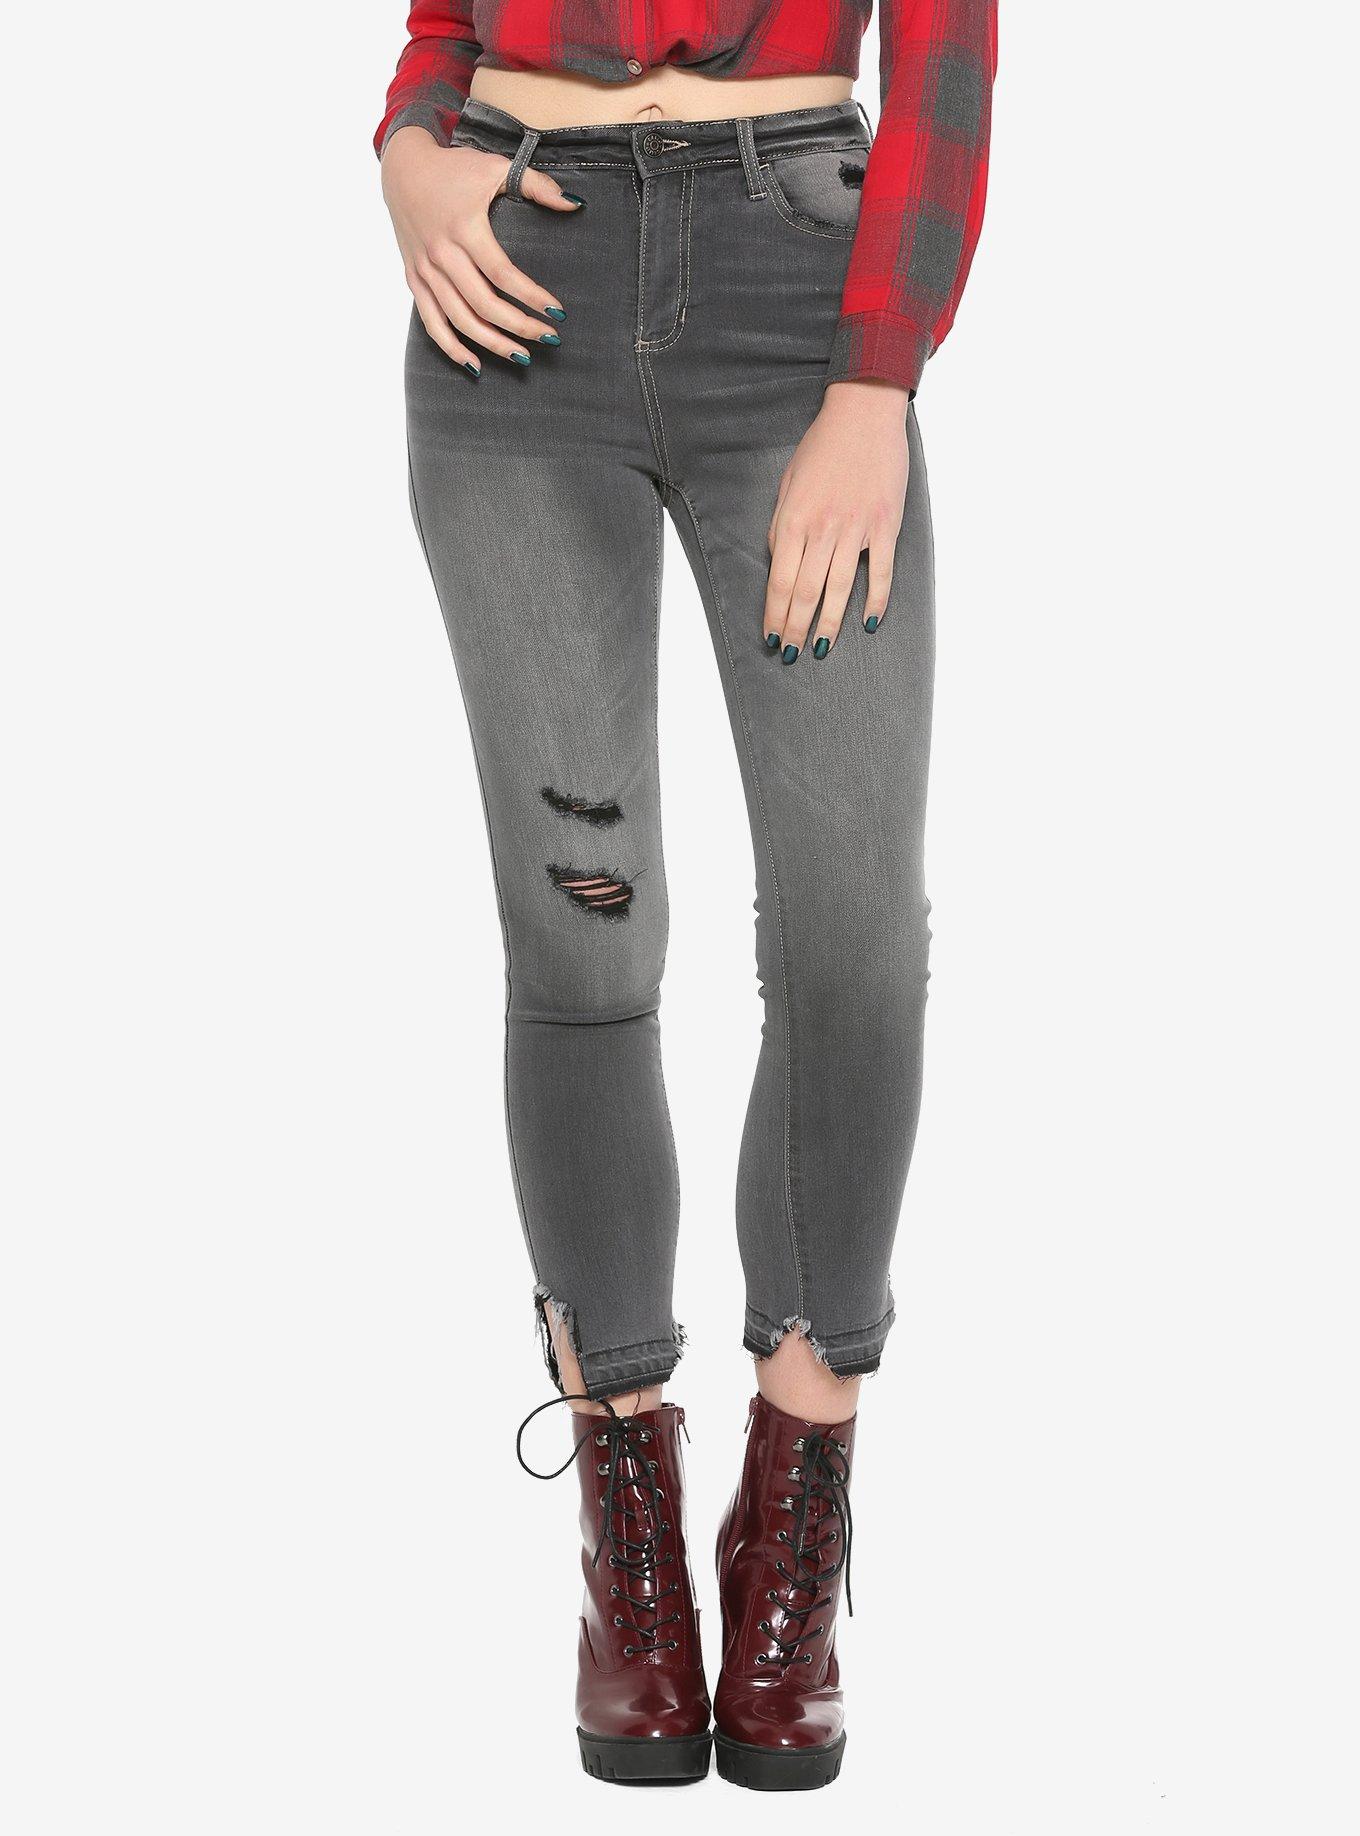 Cello Grey Distressed Skinny Jeans | Hot Topic